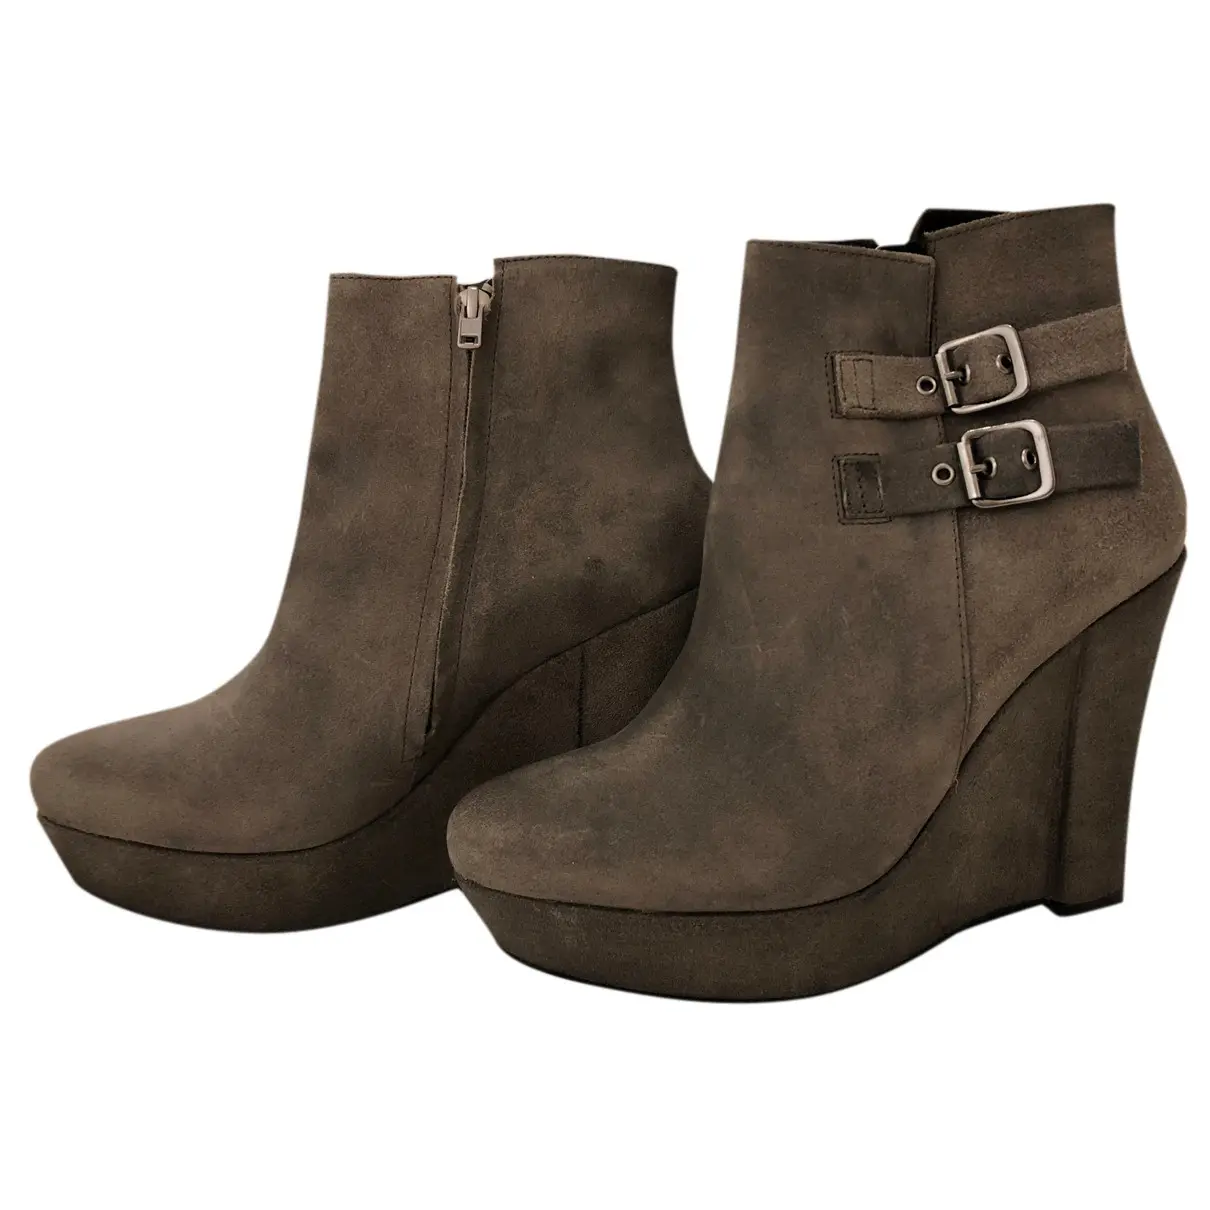 Boots The Kooples